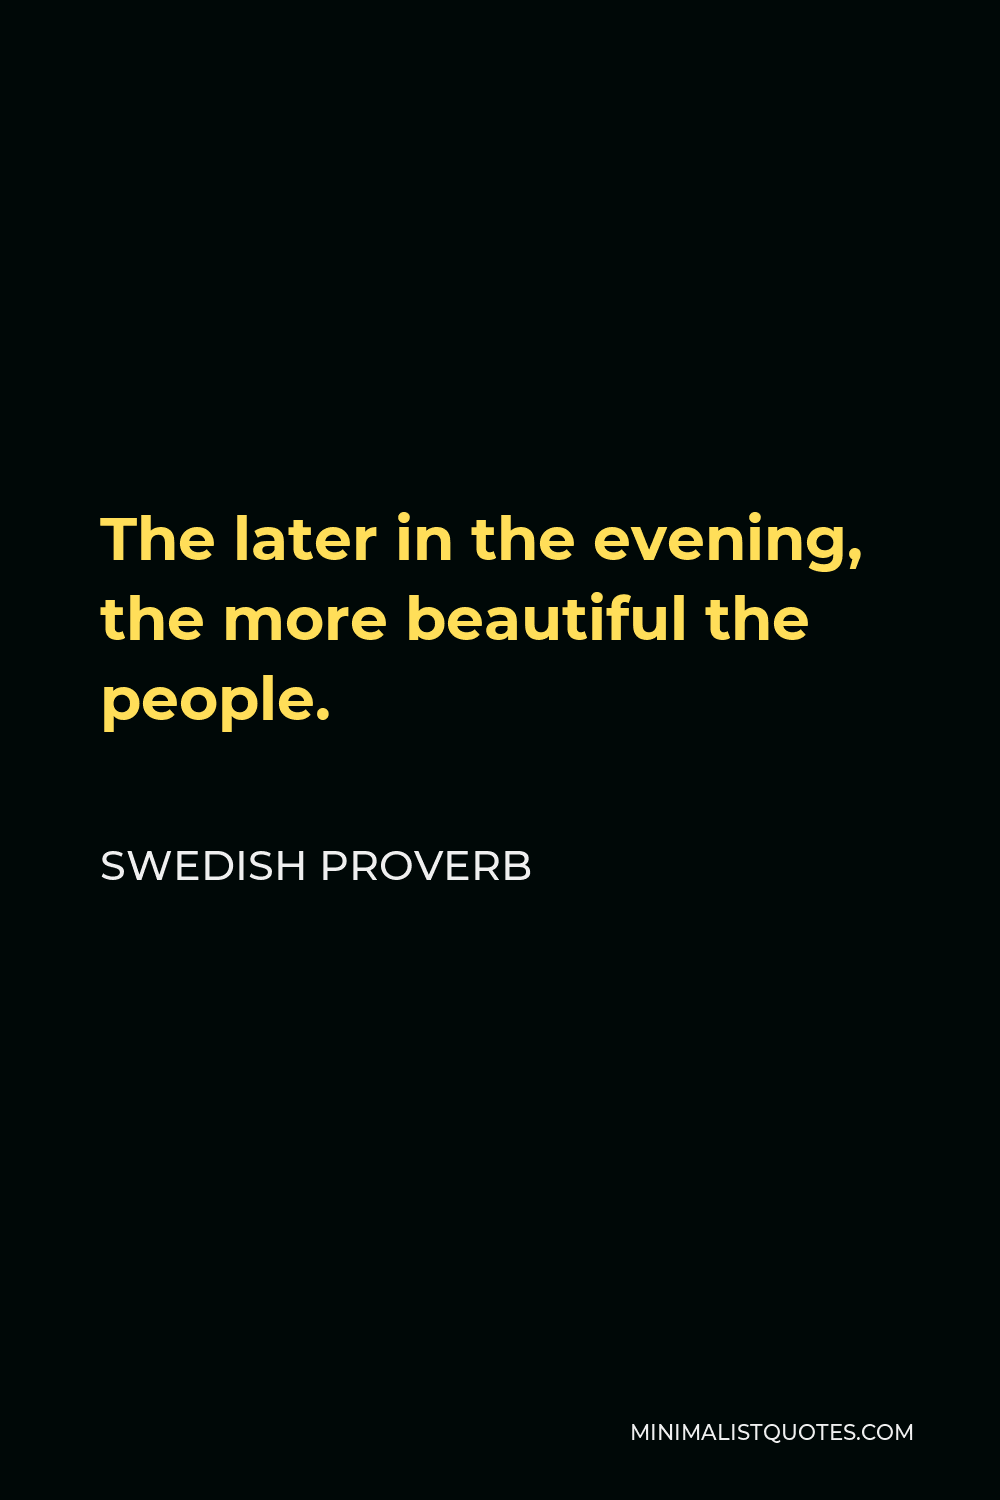 Swedish Proverb Quote - The later in the evening, the more beautiful the people.